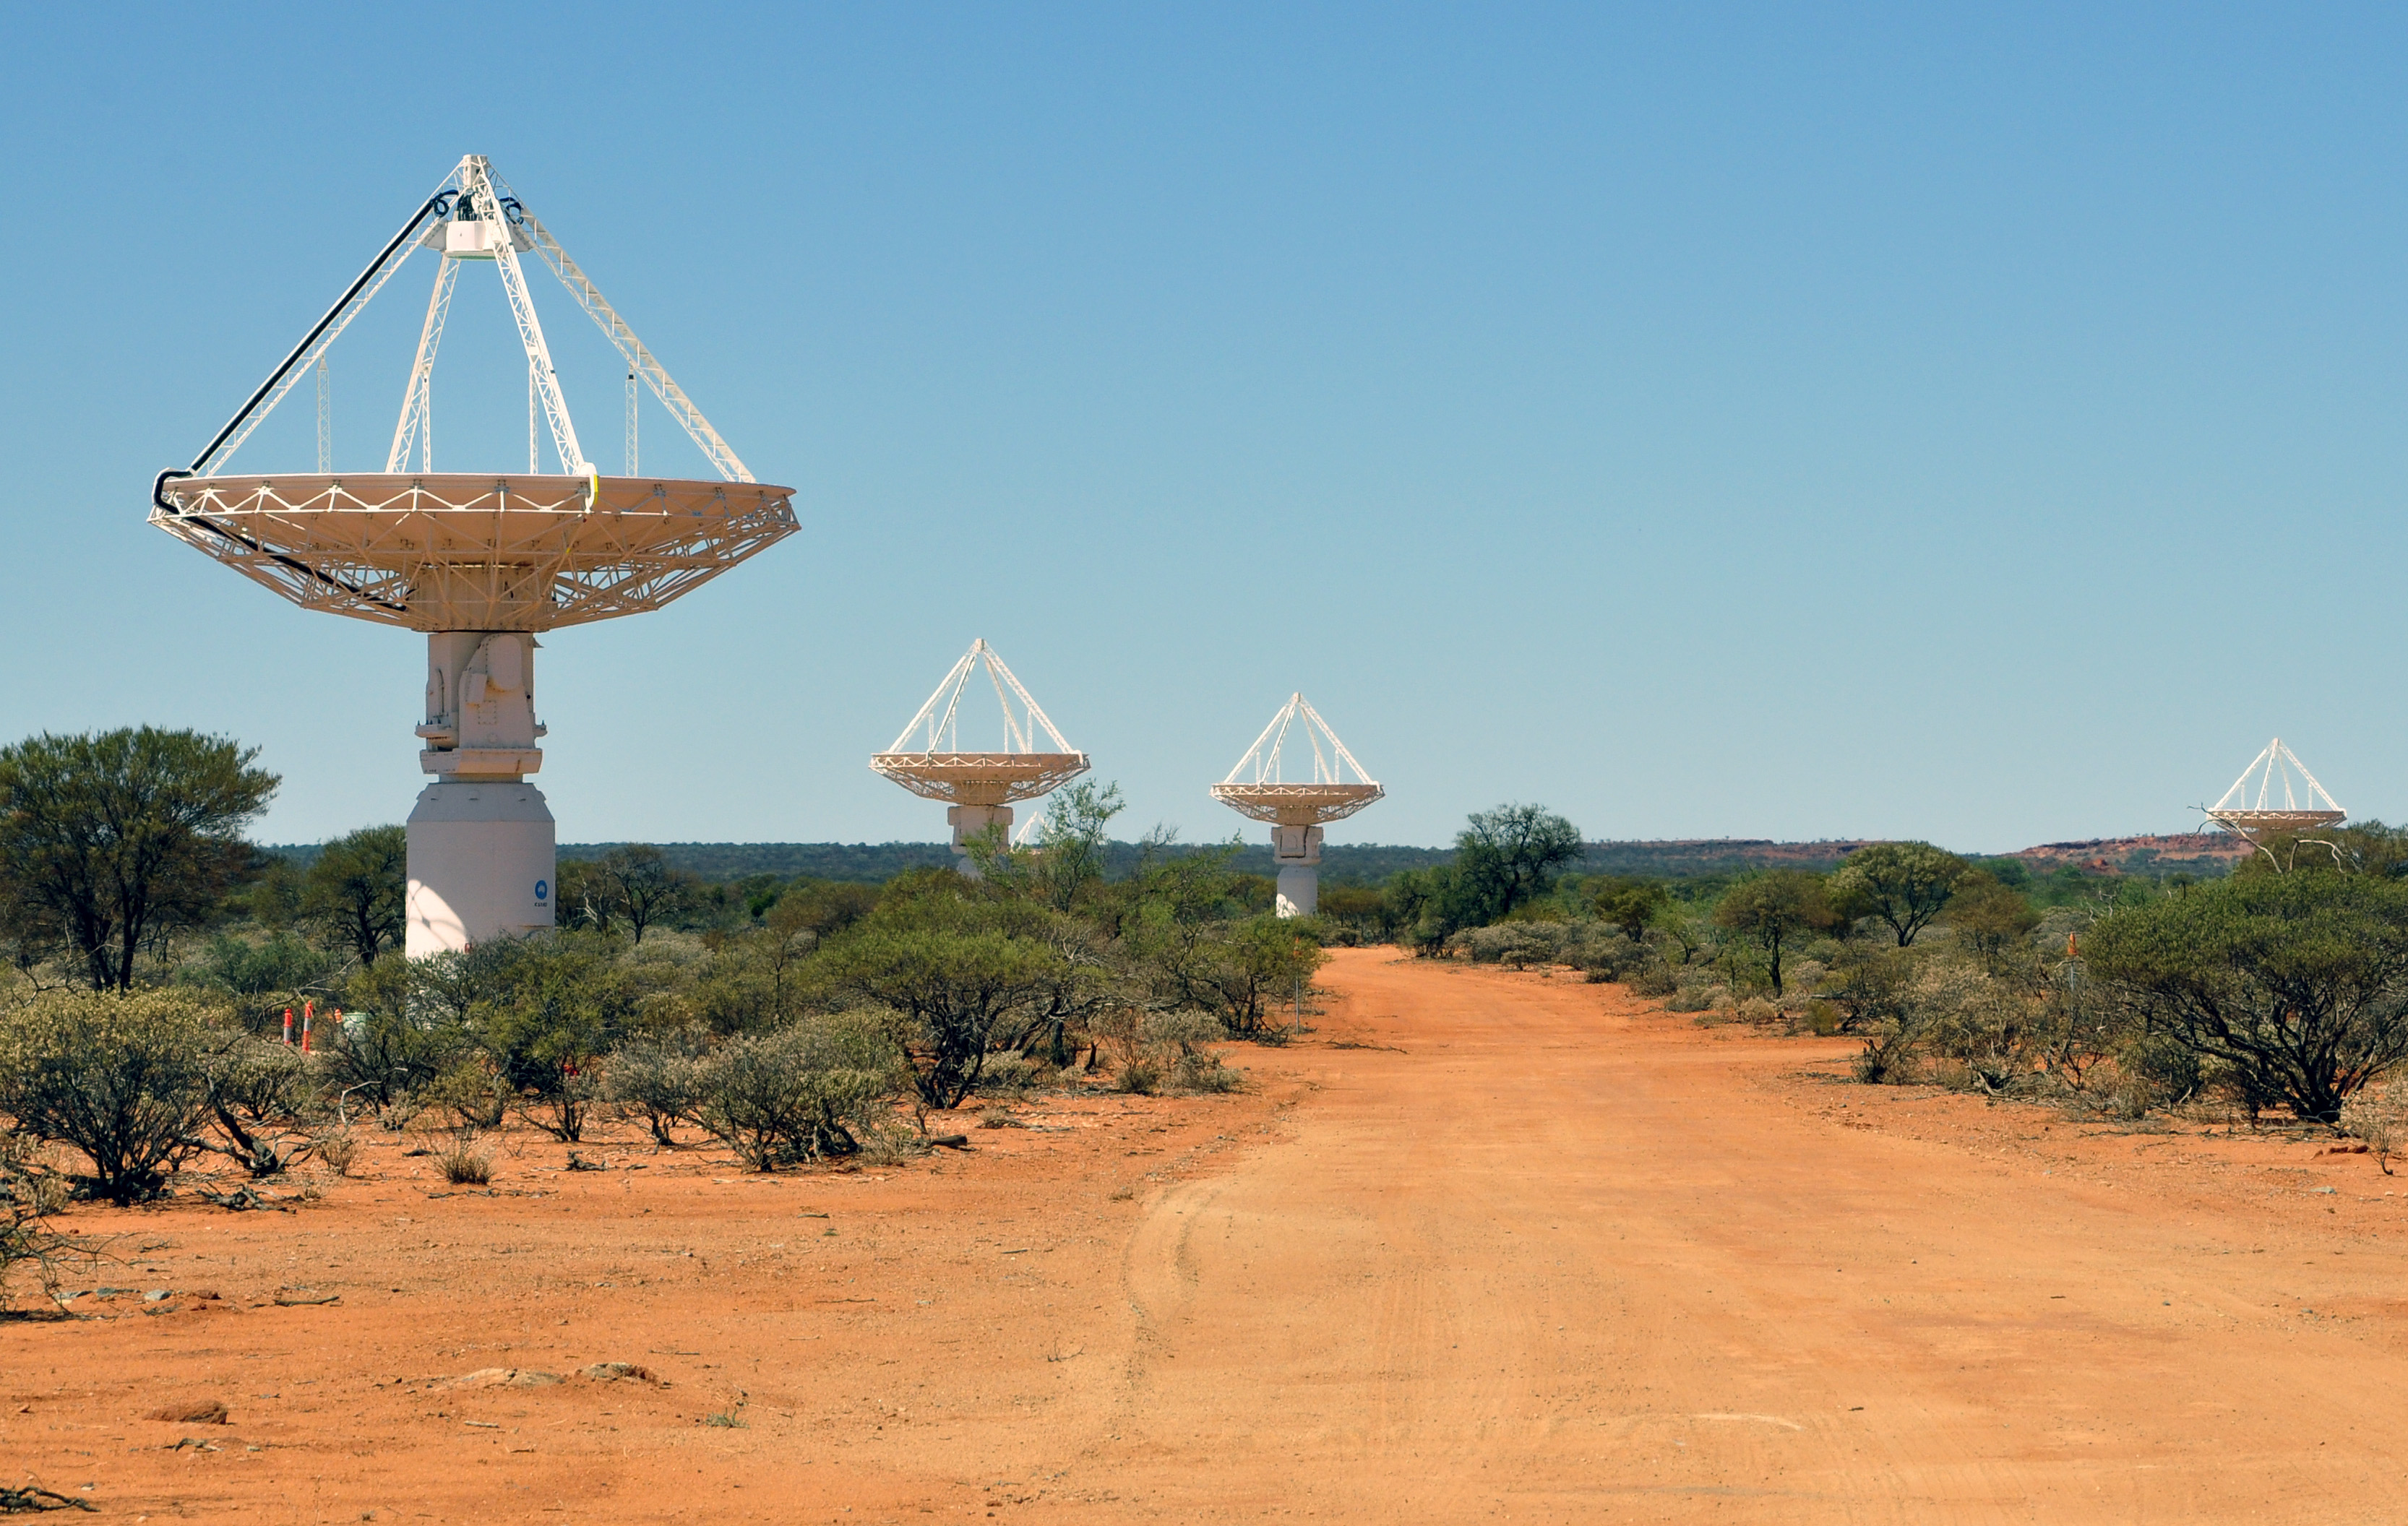 Astronomers unearth universe's oldest fast radio burst, shrouded in cosmic mystery 